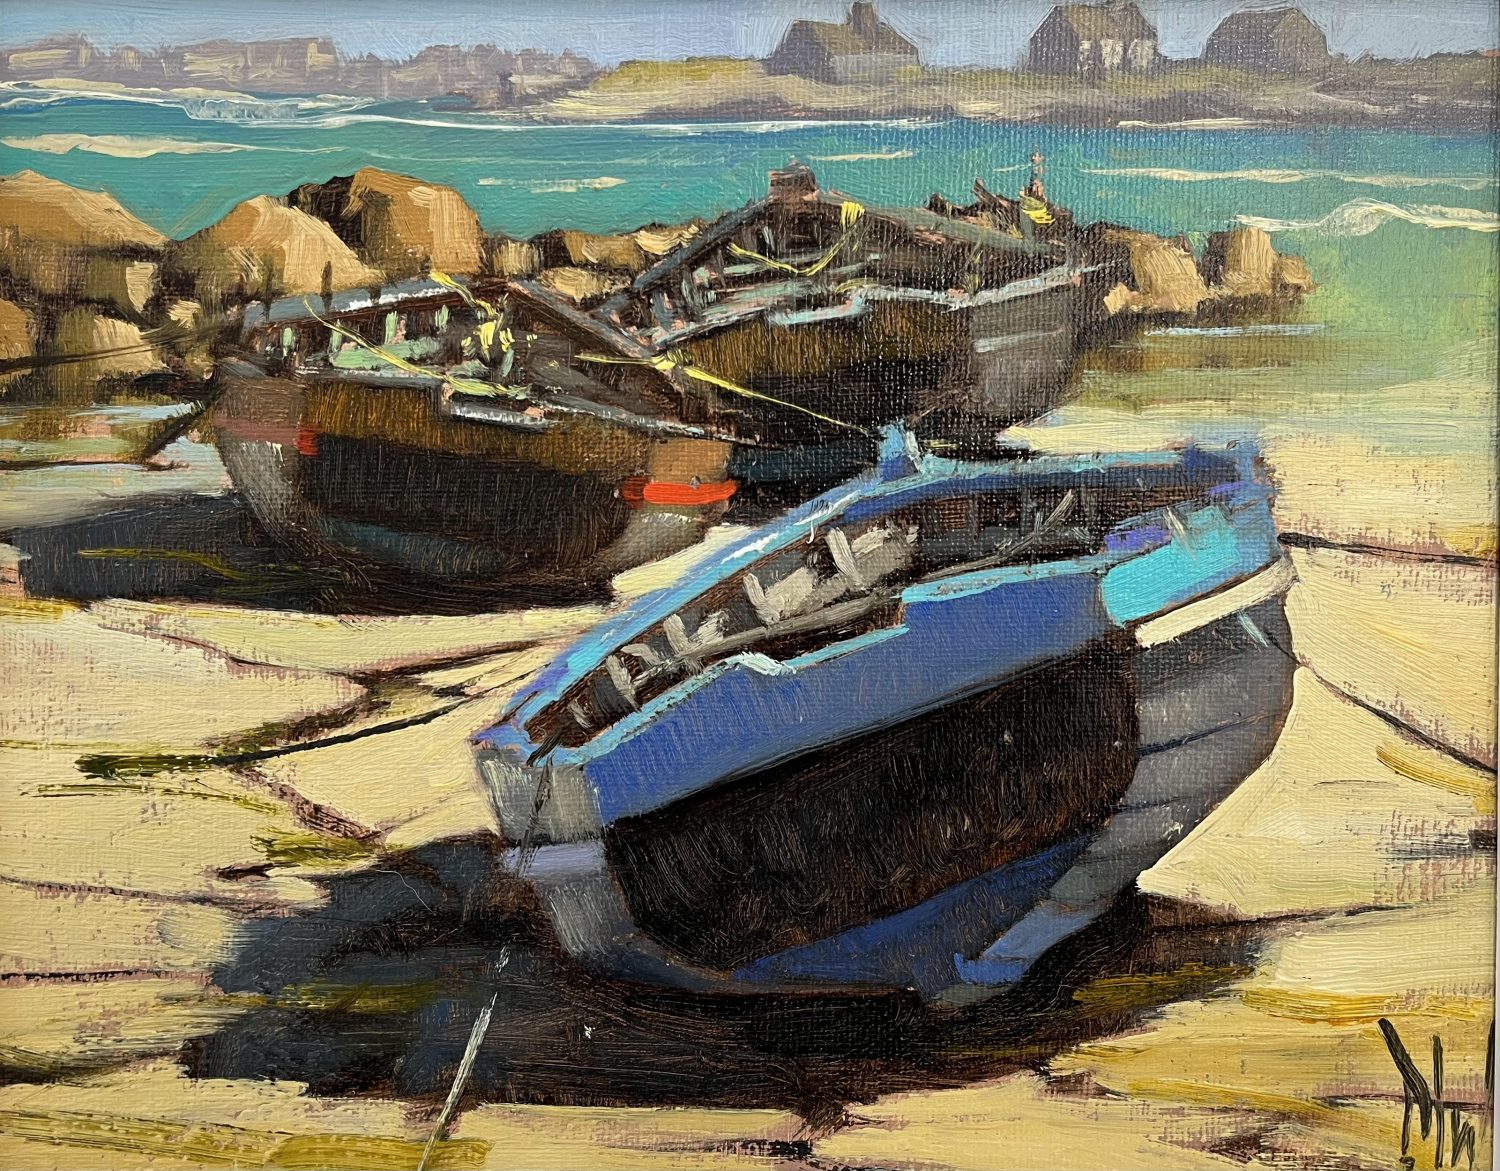 Boats at Ervallagh by Dave West